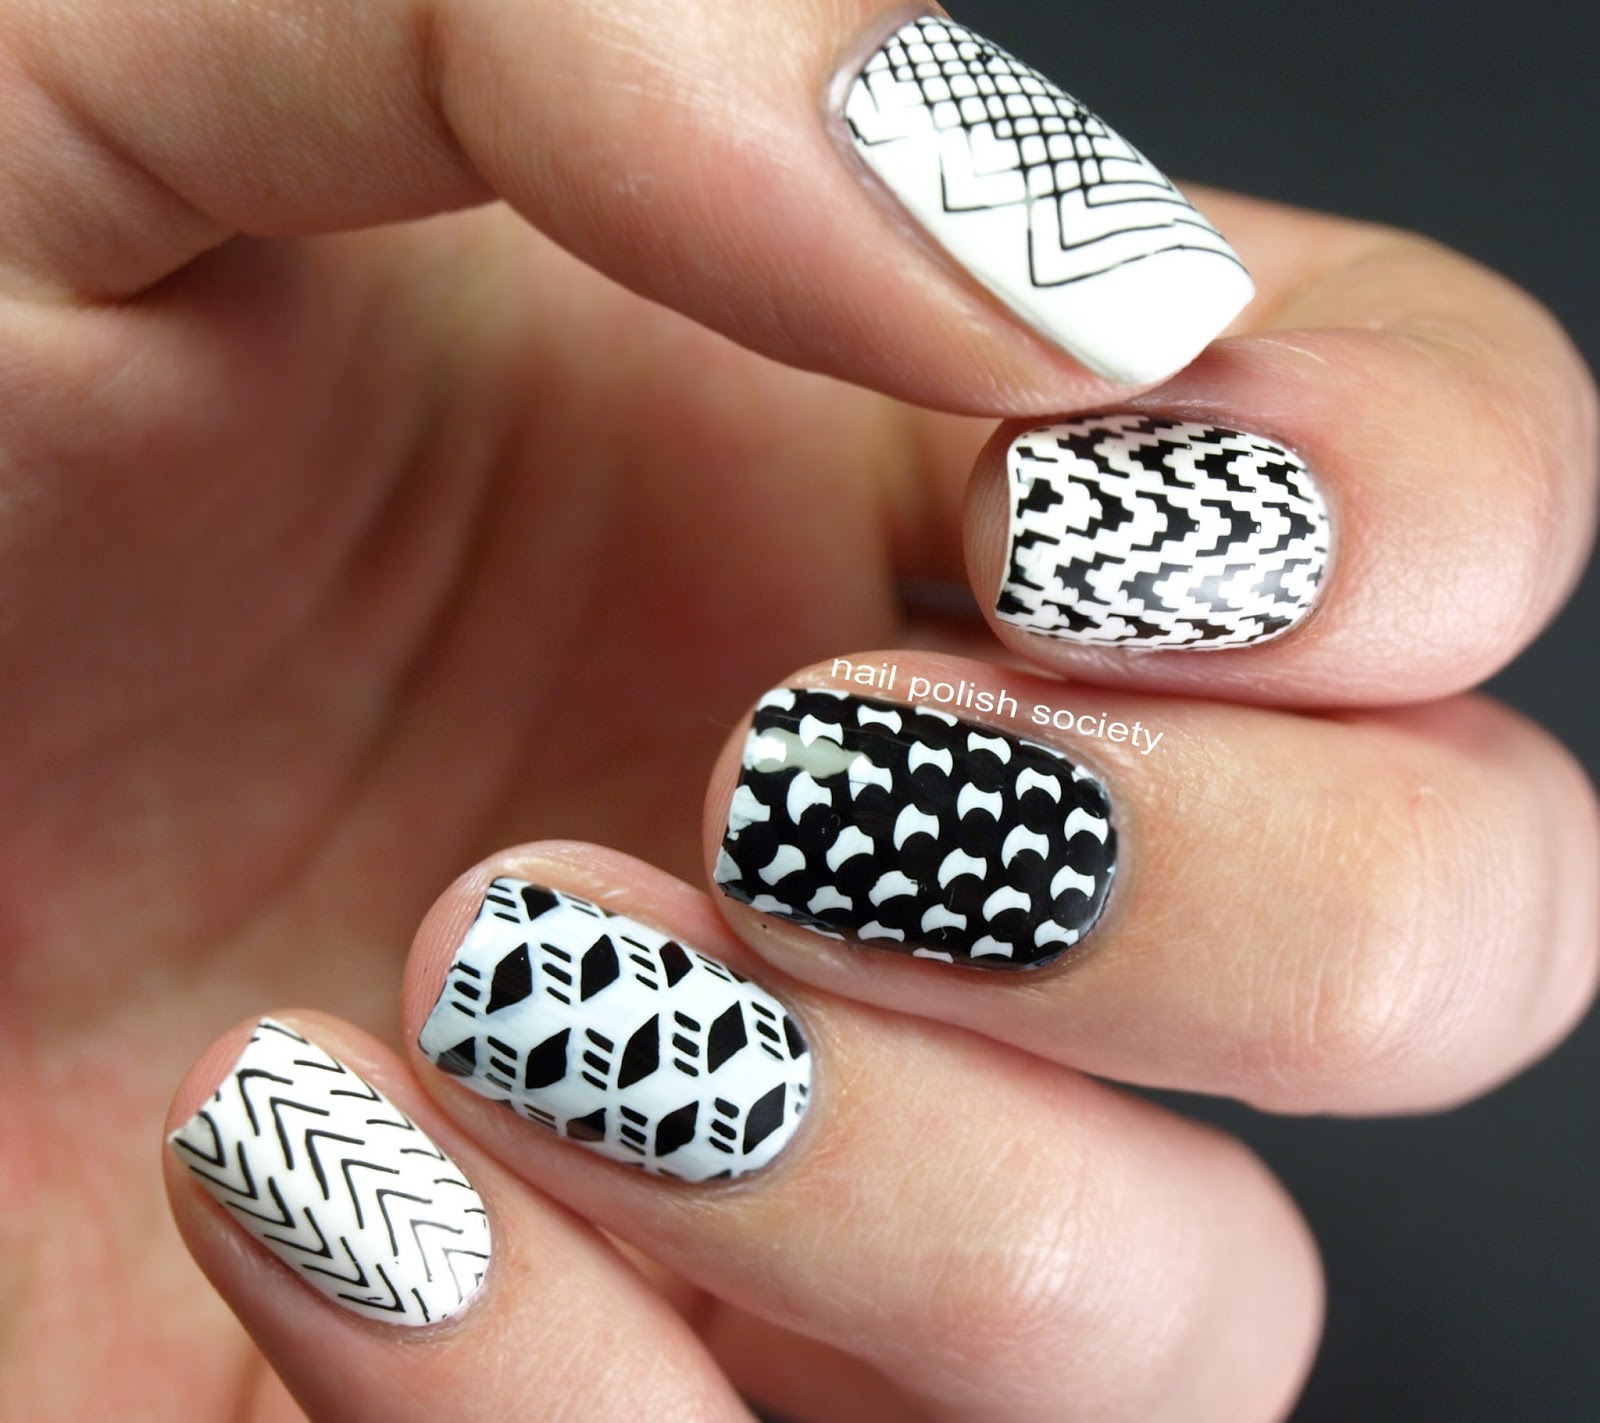 Nail Polish Society: 31DC2014 Day 07: Black and White and Stamped All Over